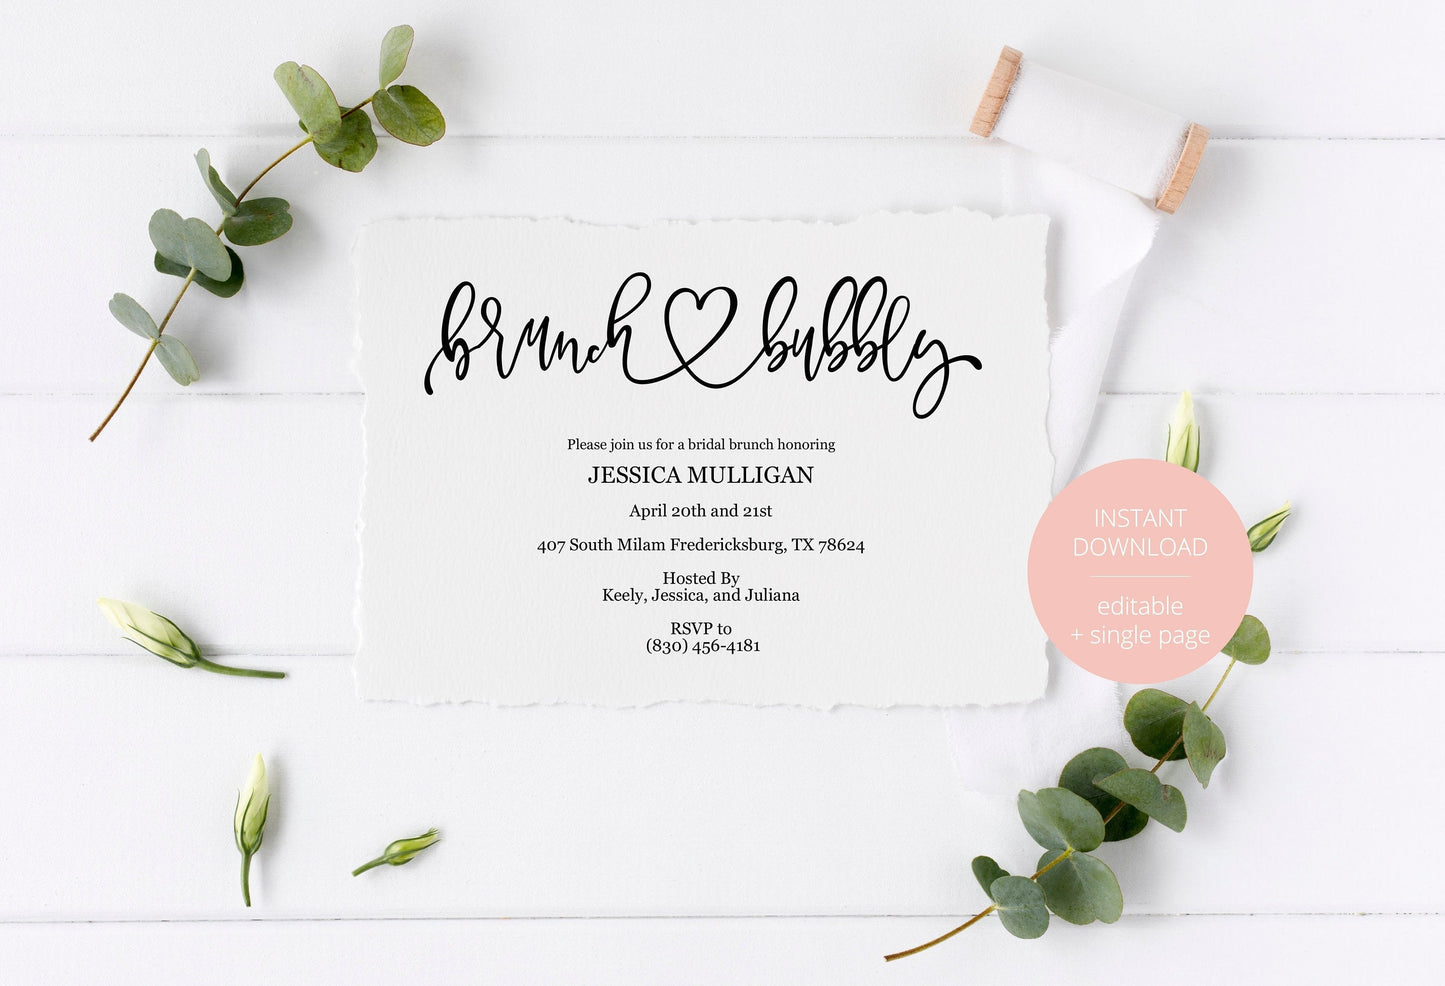 Rustic Brunch and Bubbly Bridal Shower Invitation Instant Download Printable Editable Template DIY Bridal Shower Invite - JESSICA SHOWERS | BACHELORETTE SAVVY PAPER CO